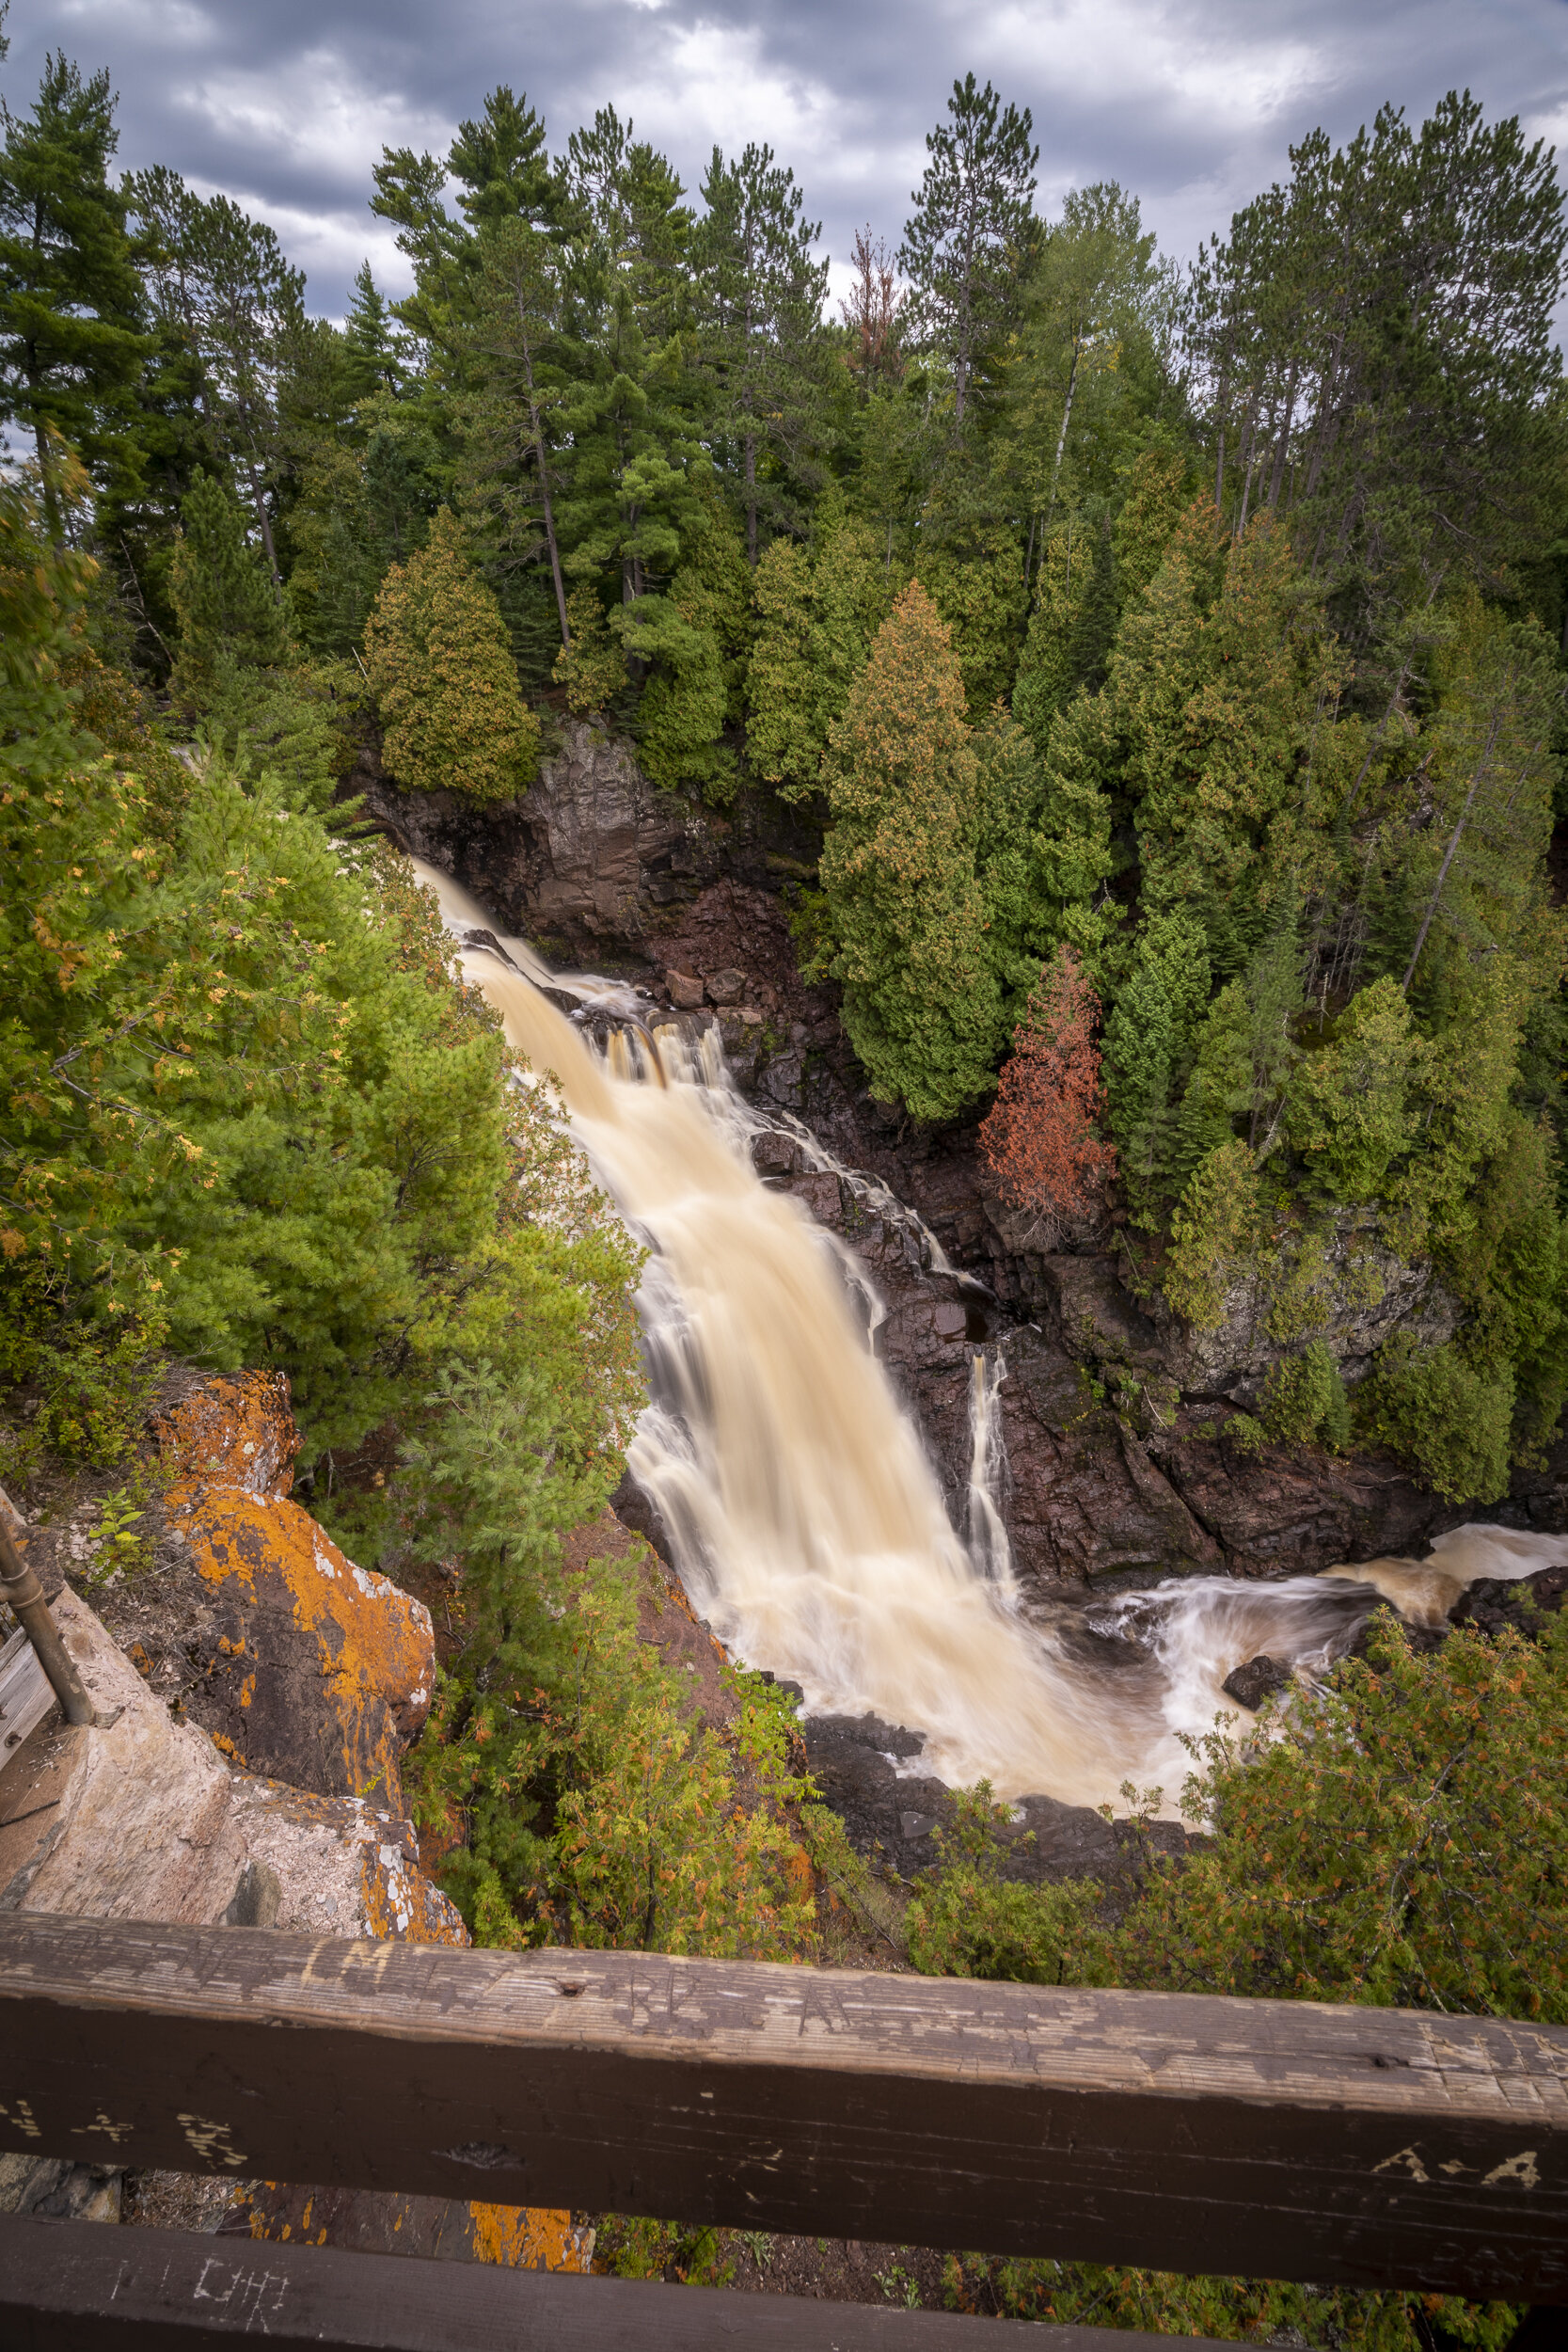 The tallest waterfall in Wisconsin at Pattison State Park.